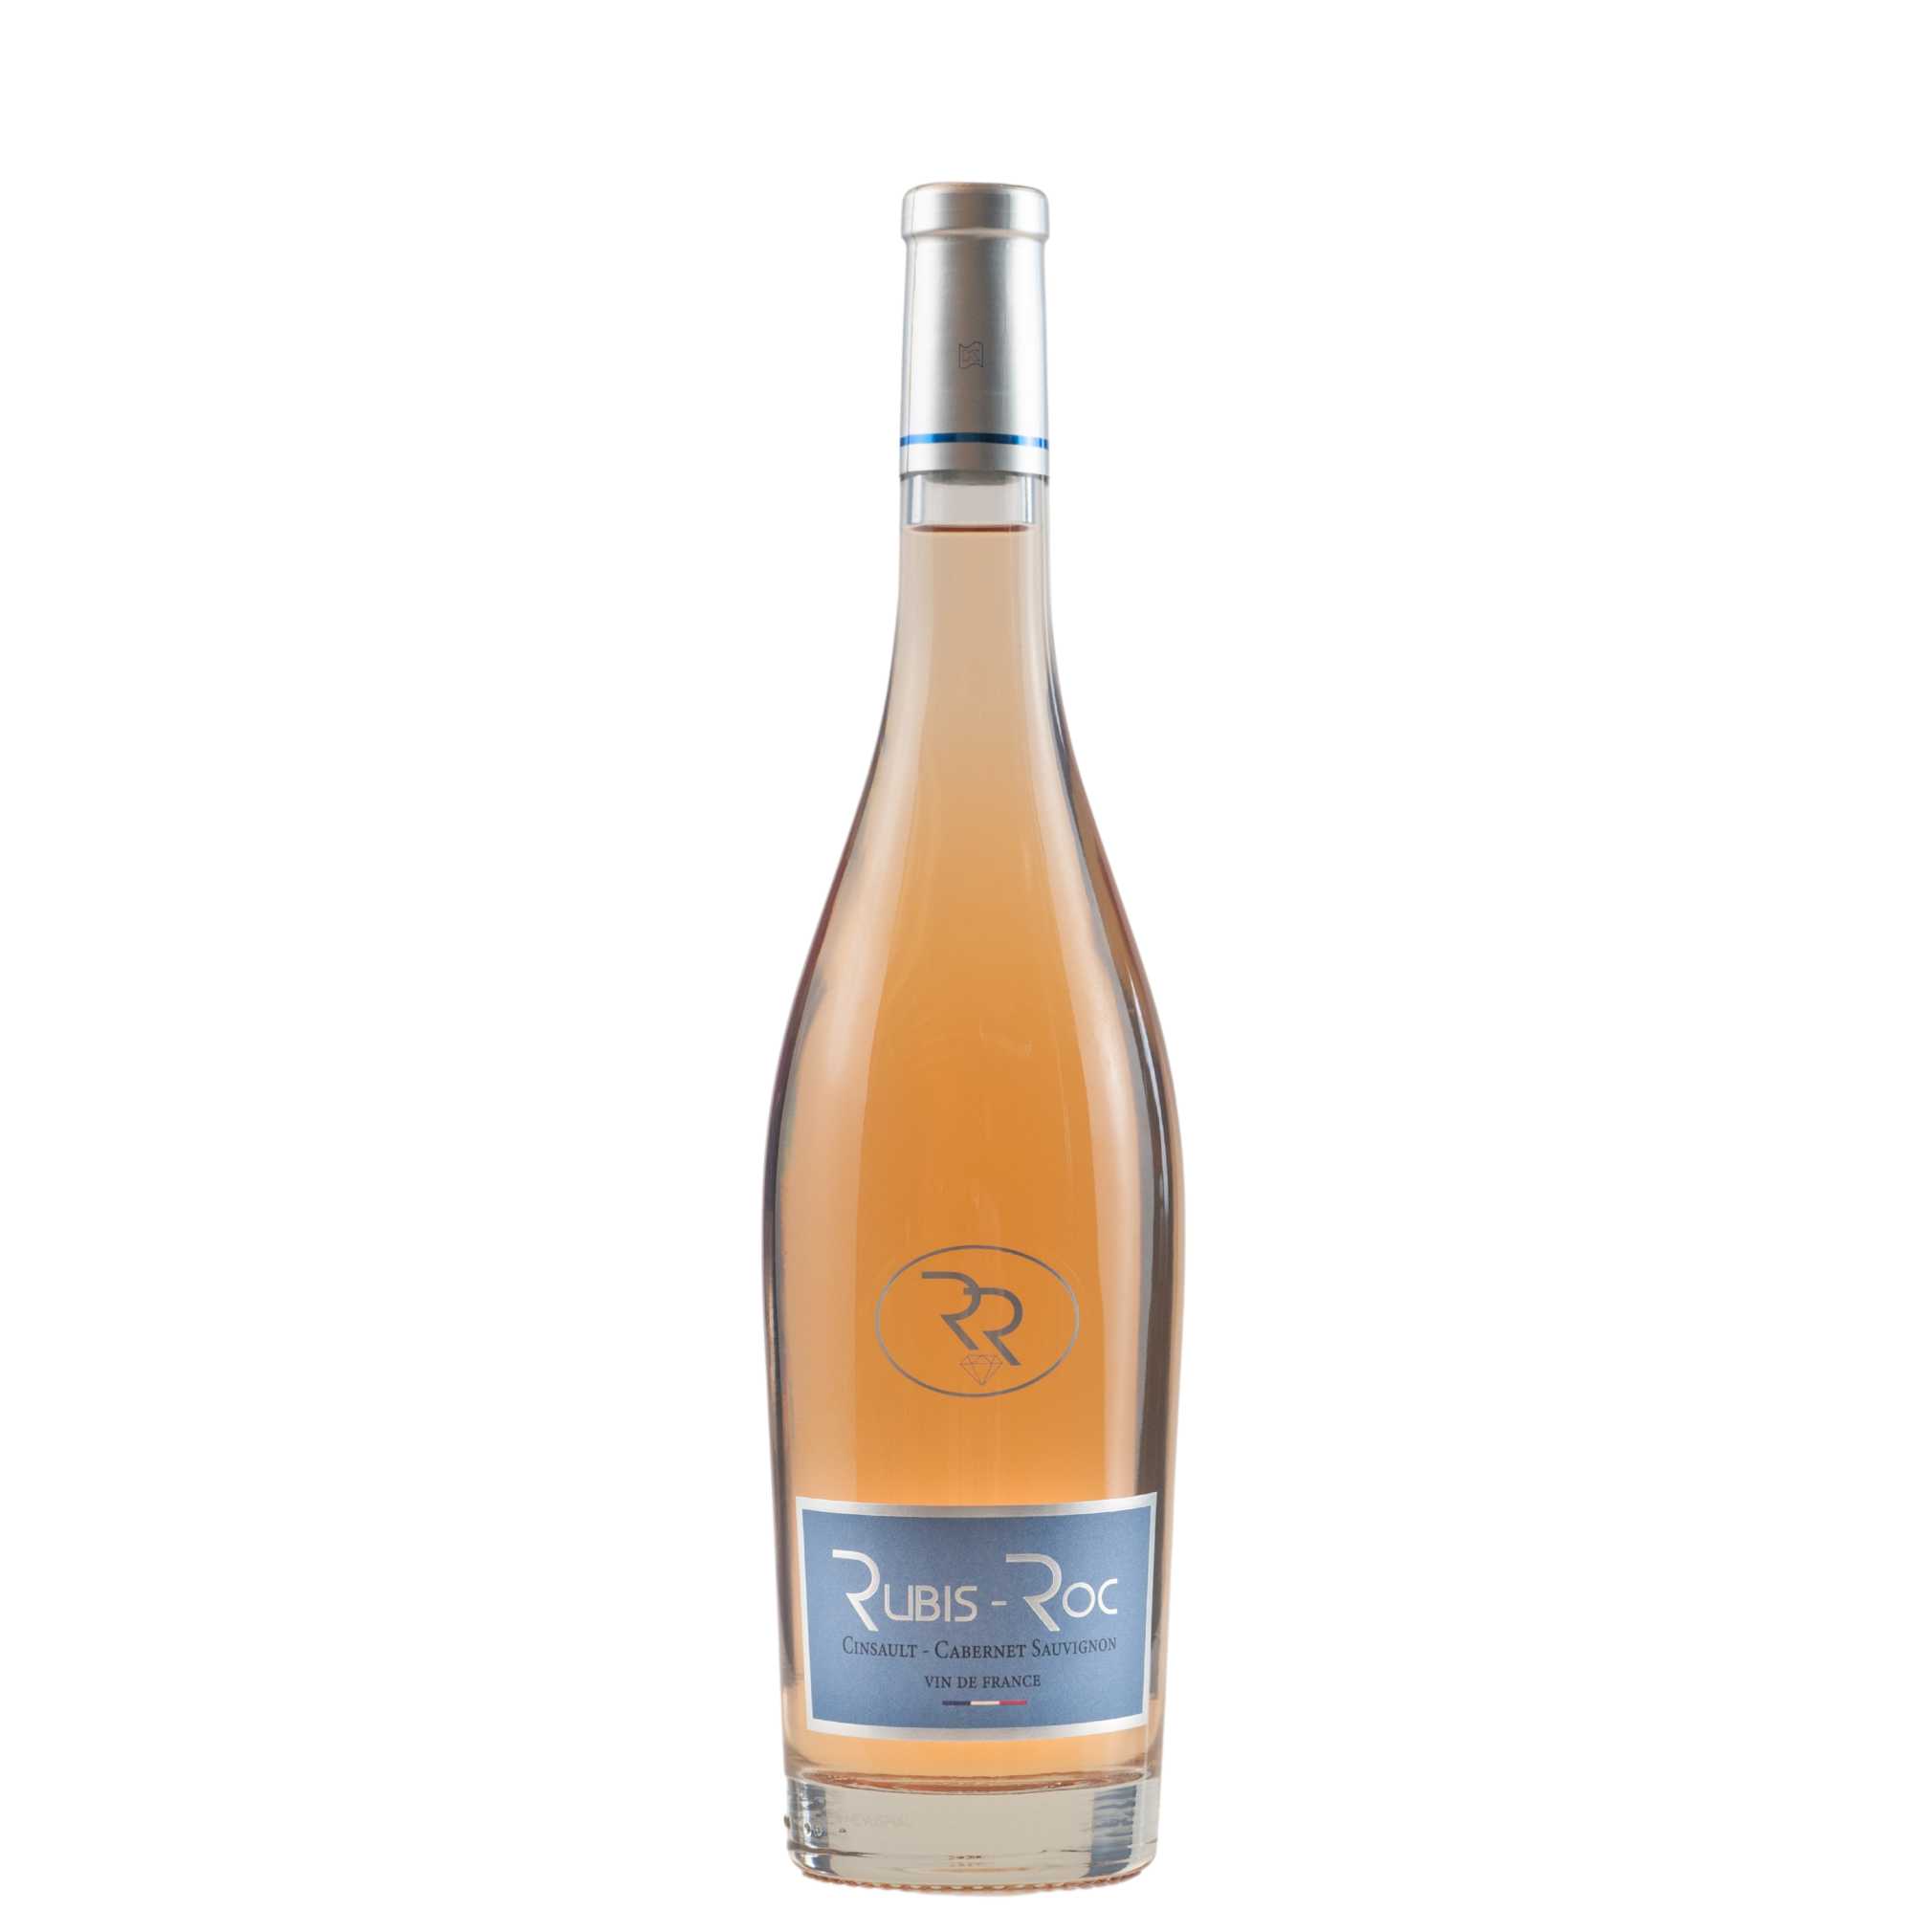 Rubis-Roc Rose - A Kosher Wine From France